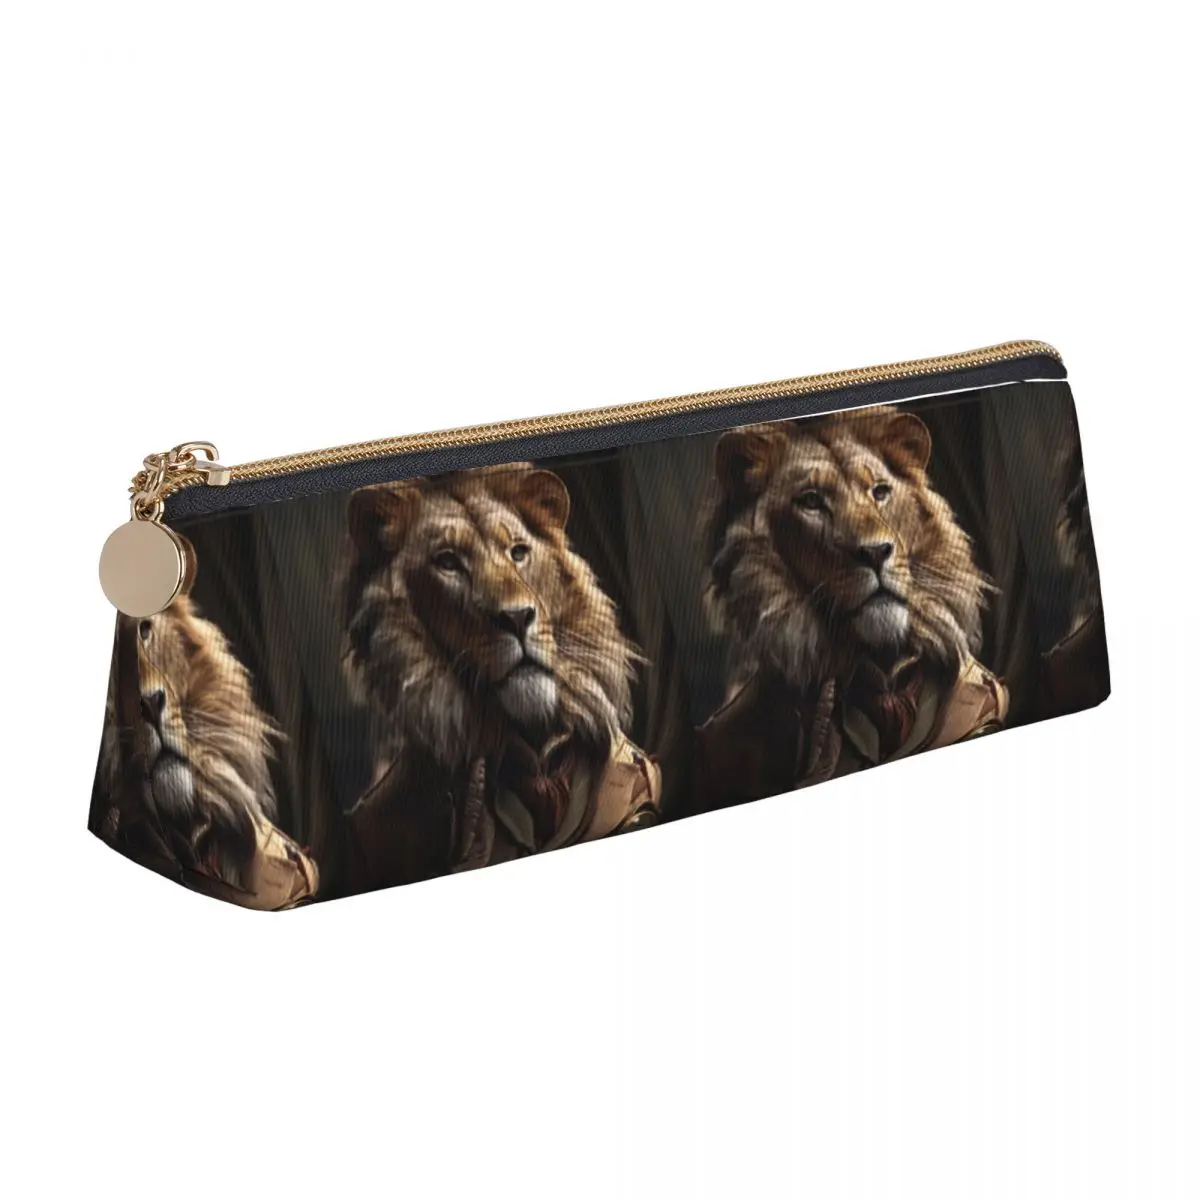 Lion Triangle Pencil Case Personify Hunting Animal Simple Zipper Pencil Box For Teens School Leather Pen Pouch